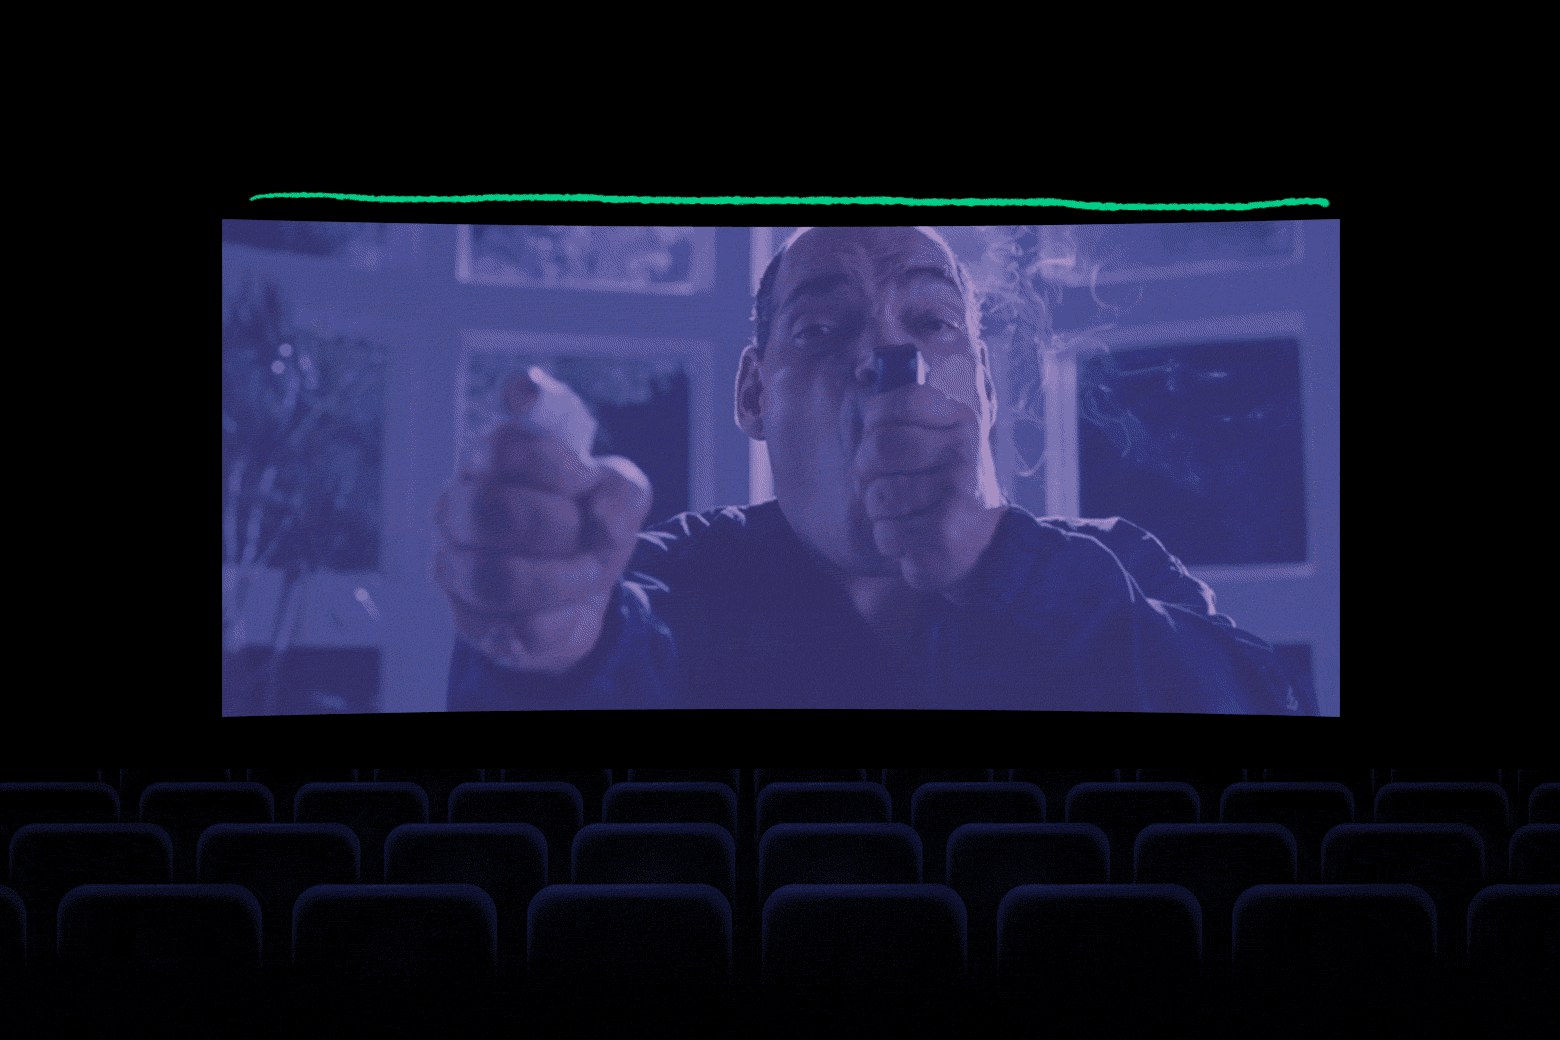 An empty movie theater's screen shows Wheezy Joe shooting himself in the mouth and George Clooney's character reacting